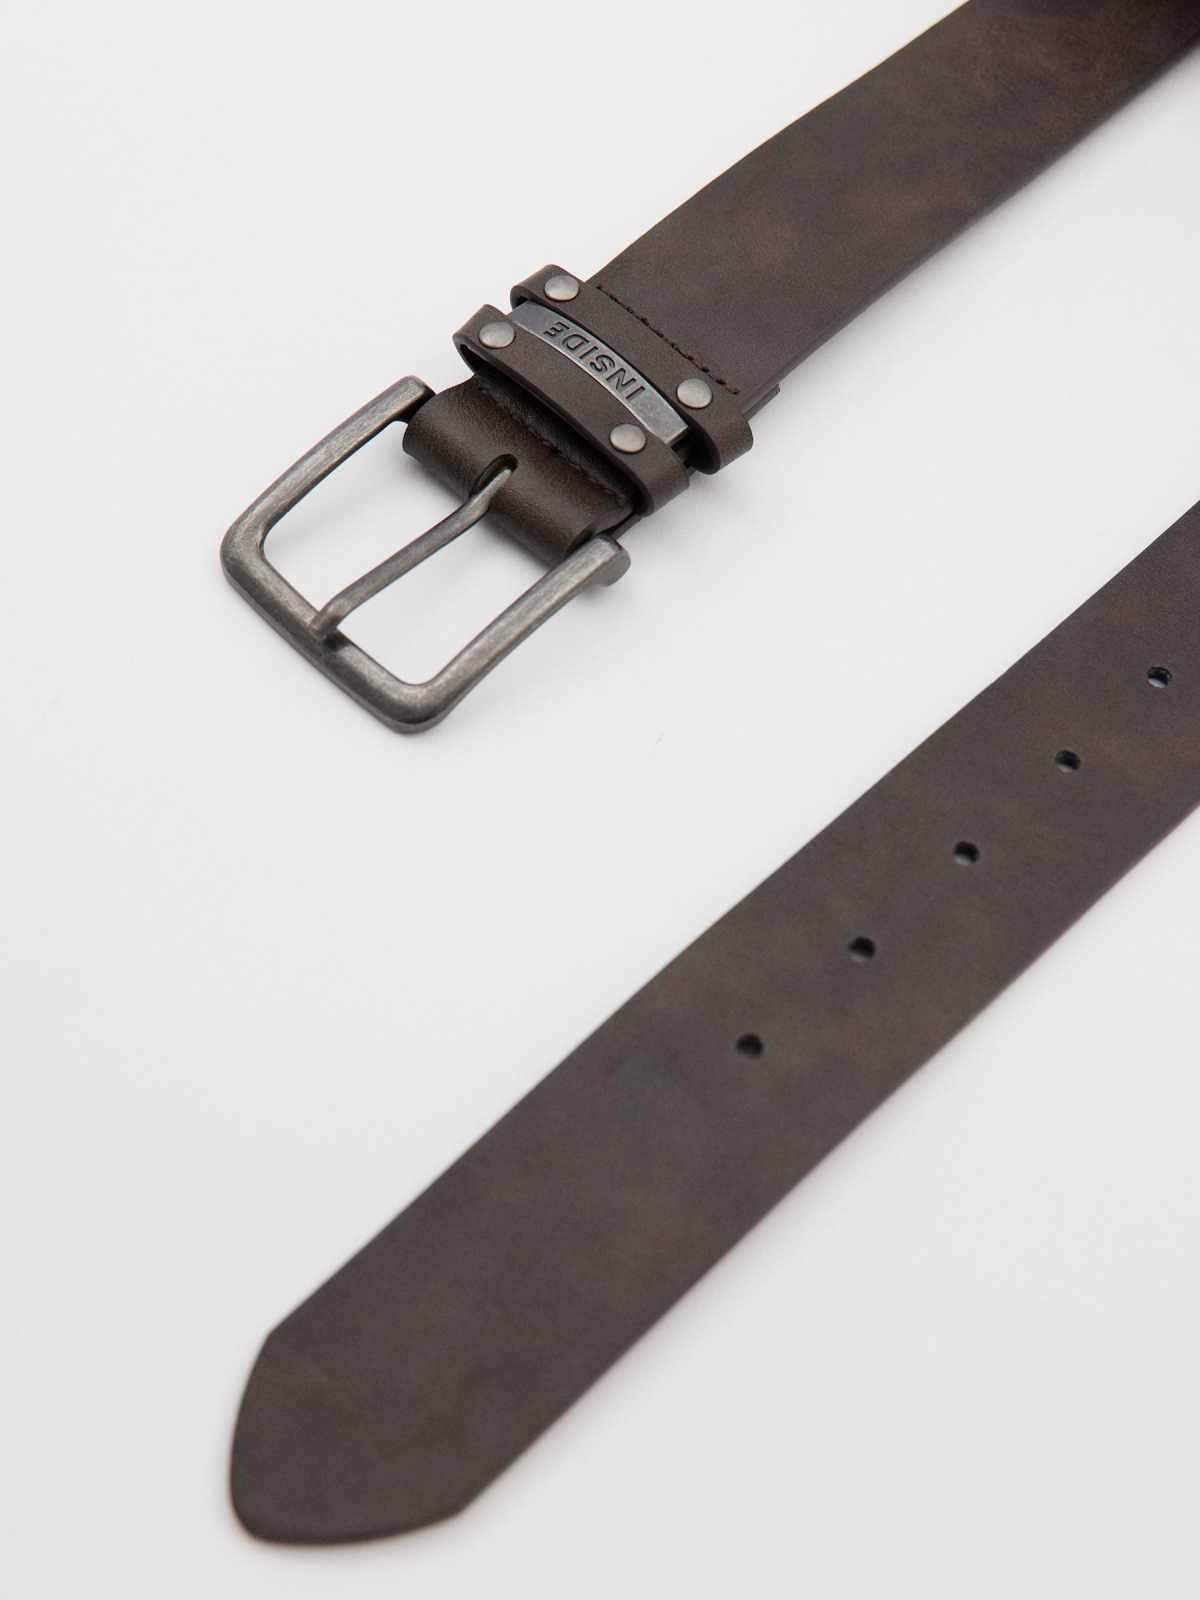 Brown leatherette belt detail view